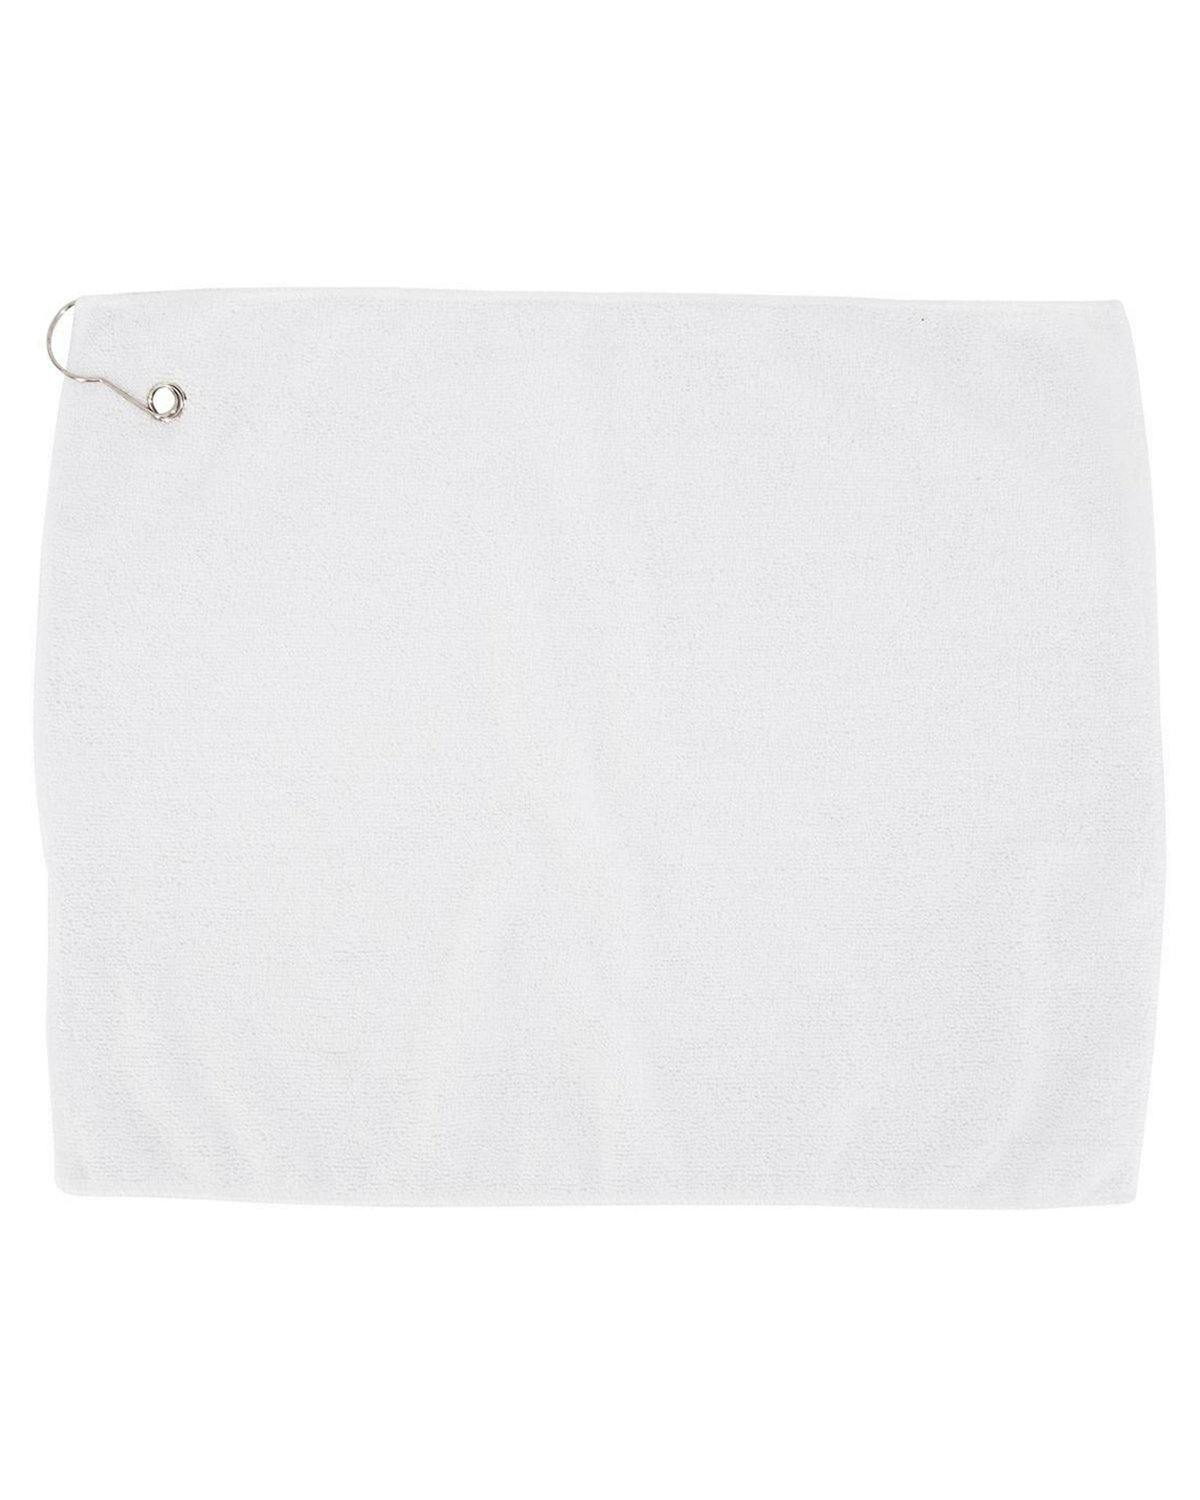 Image for Microfiber Towel with Grommet and Hook